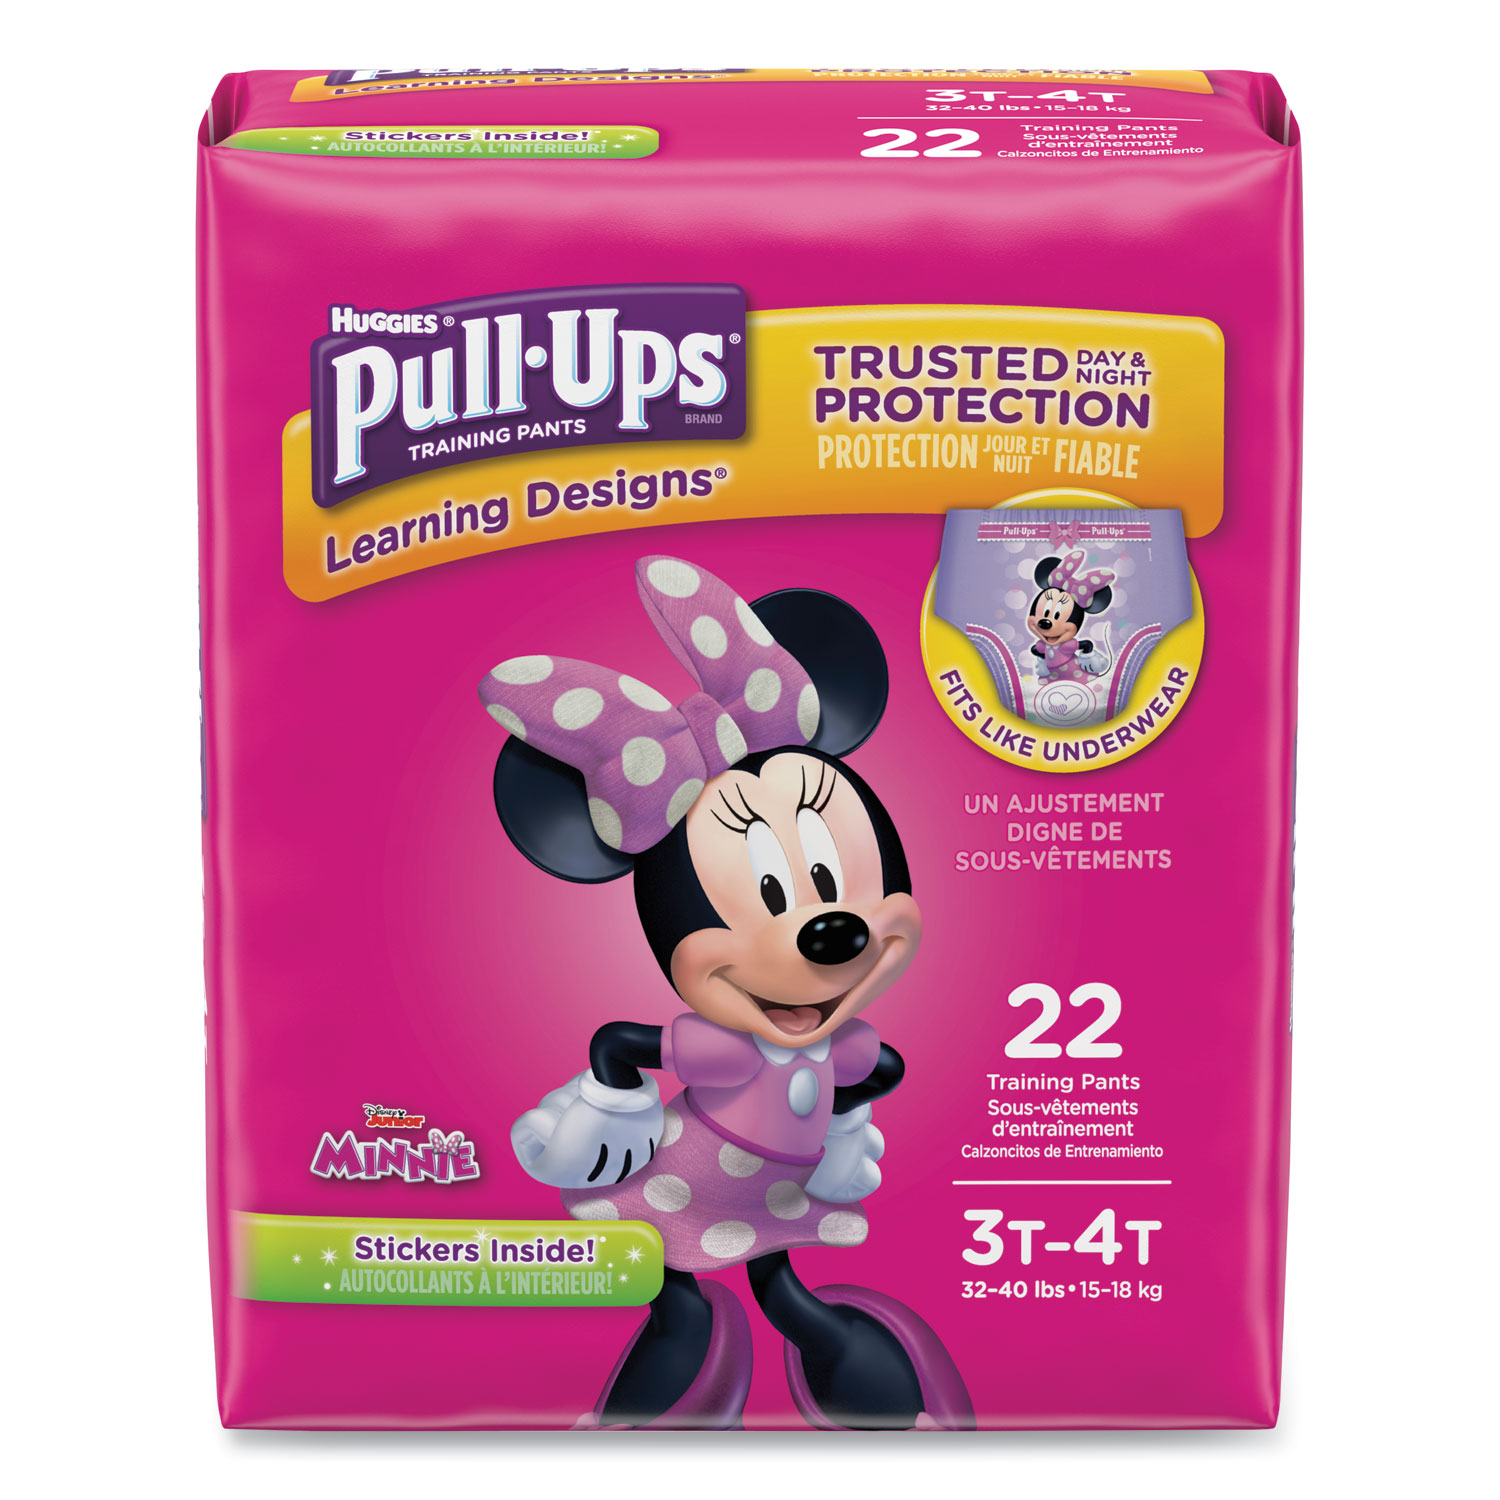  Huggies 45140 Pull-Ups Learning Designs Potty Training Pants for Girls, Size 3T-4T, 22/Pack (KCC45140) 